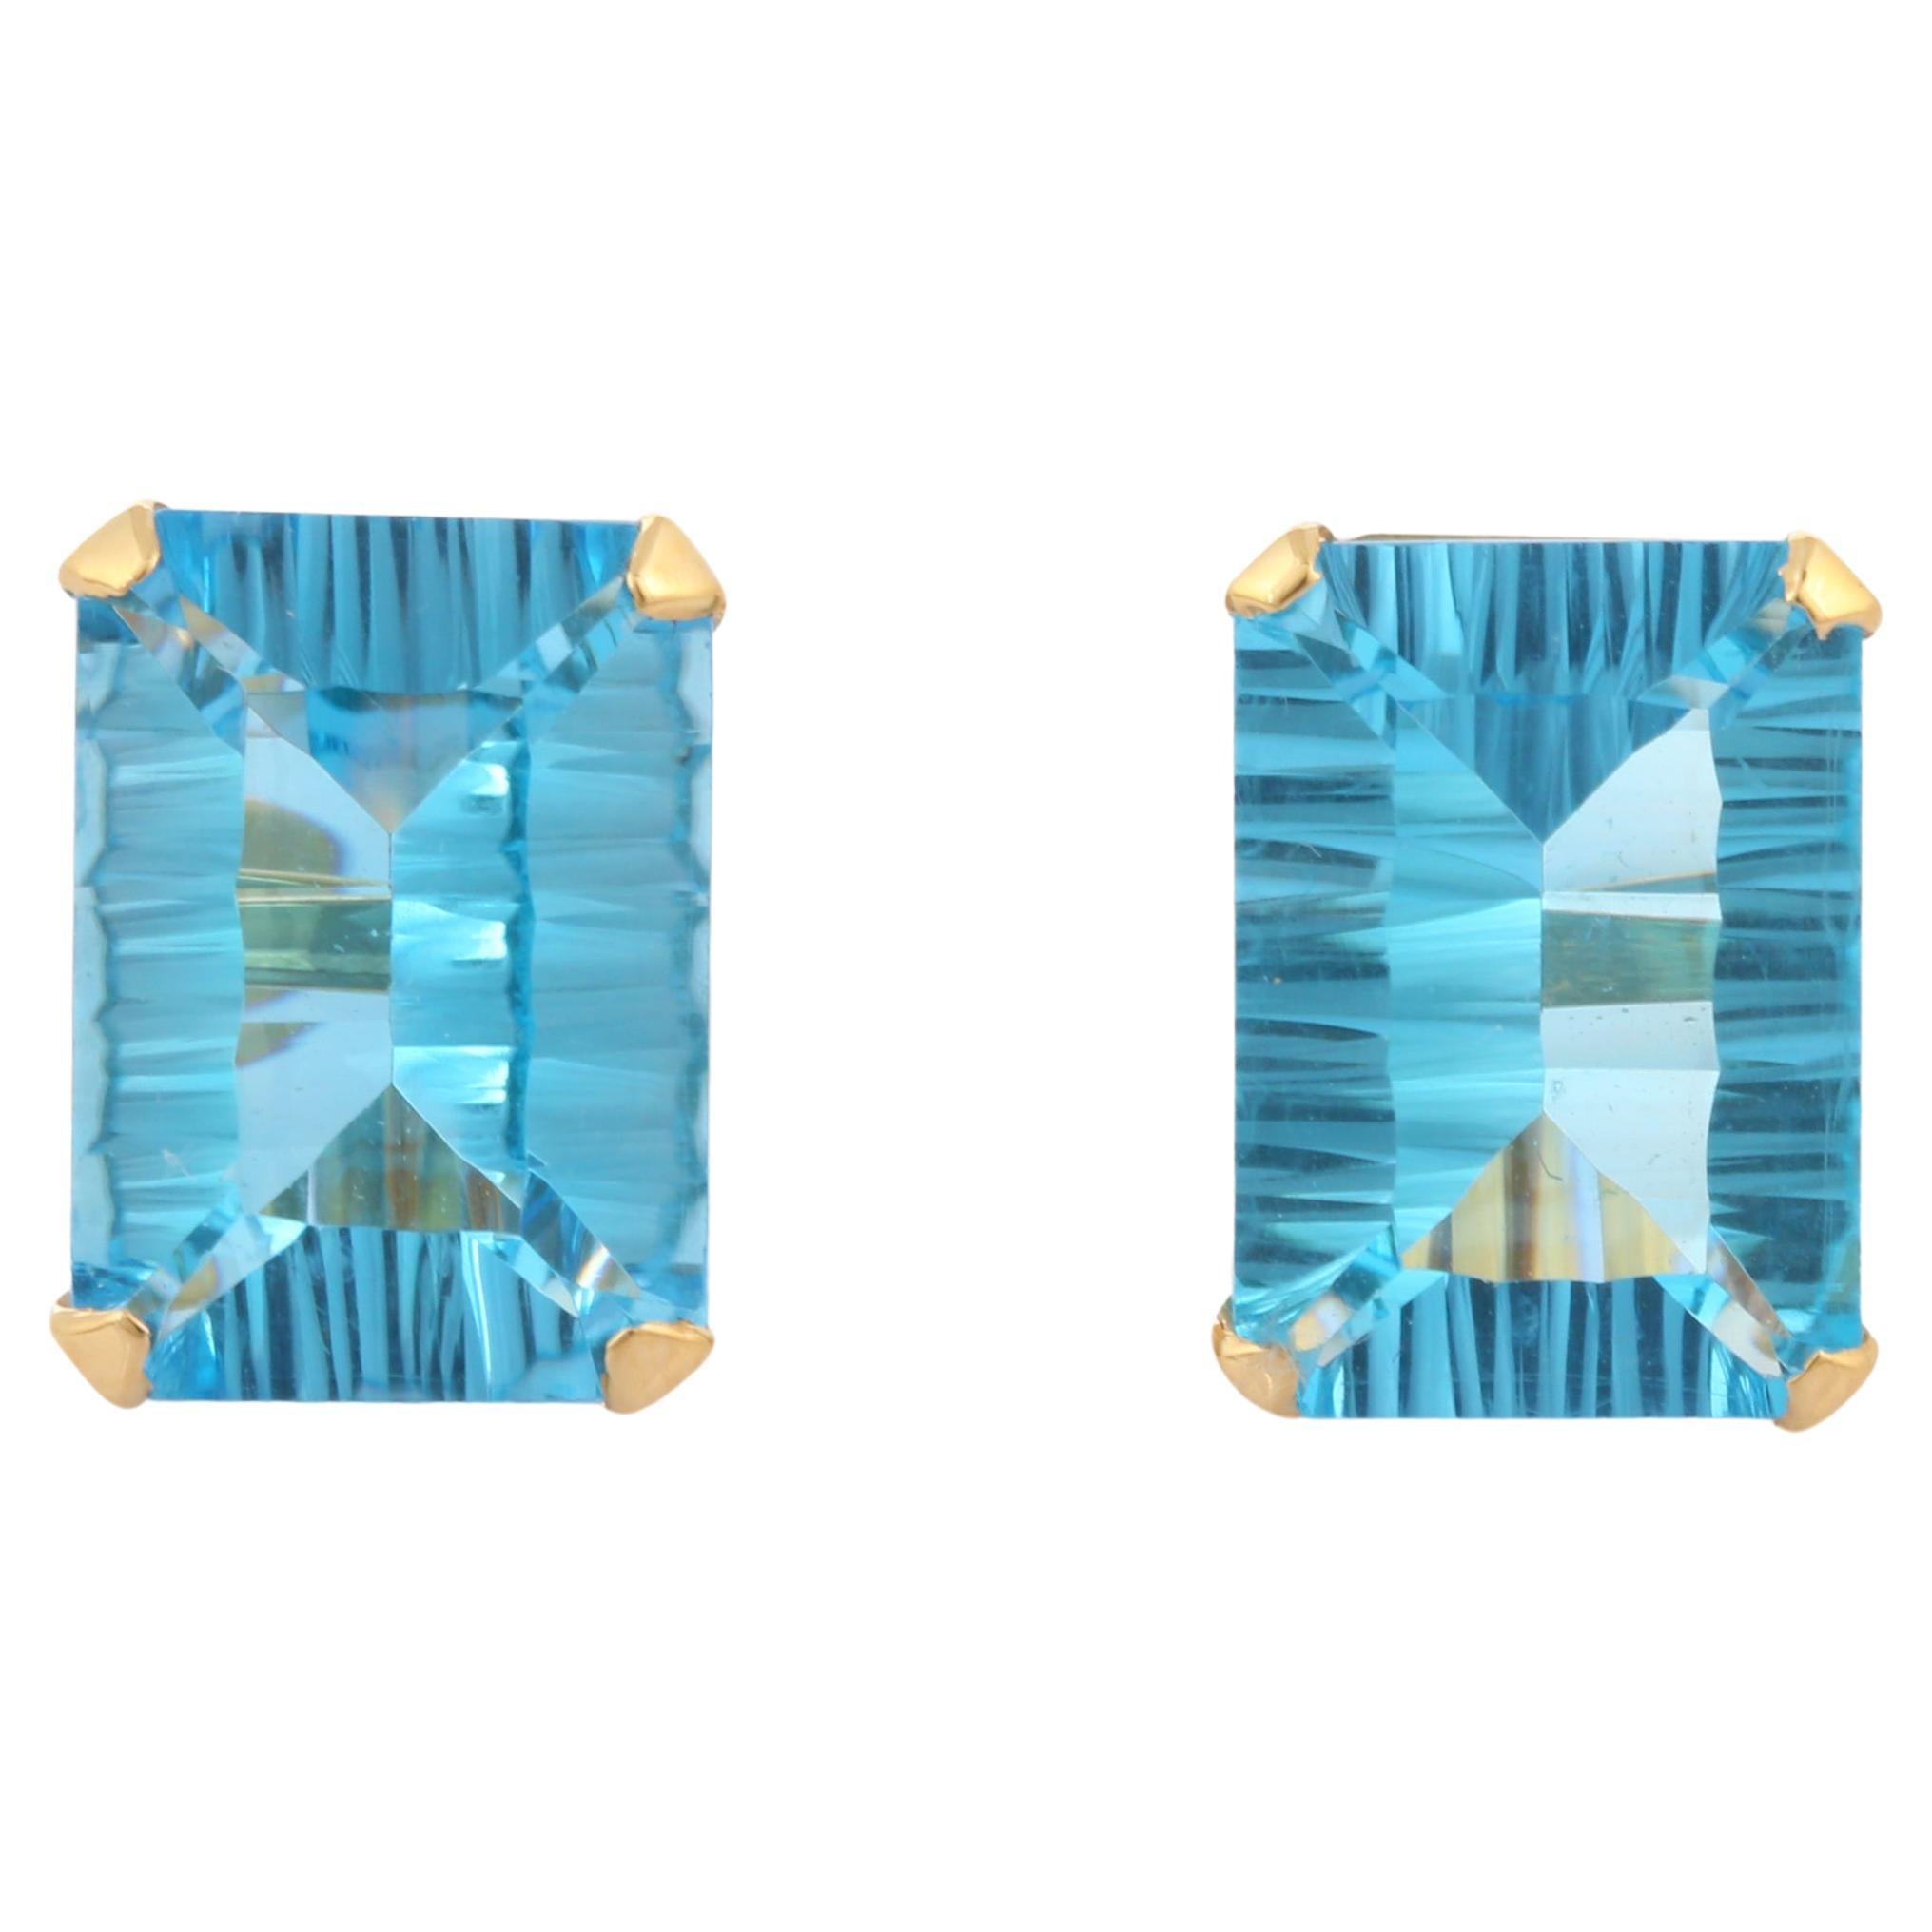 18K Solid Gold 14.65 Ct Natural Blue Topaz Solitaire Stud Earrings